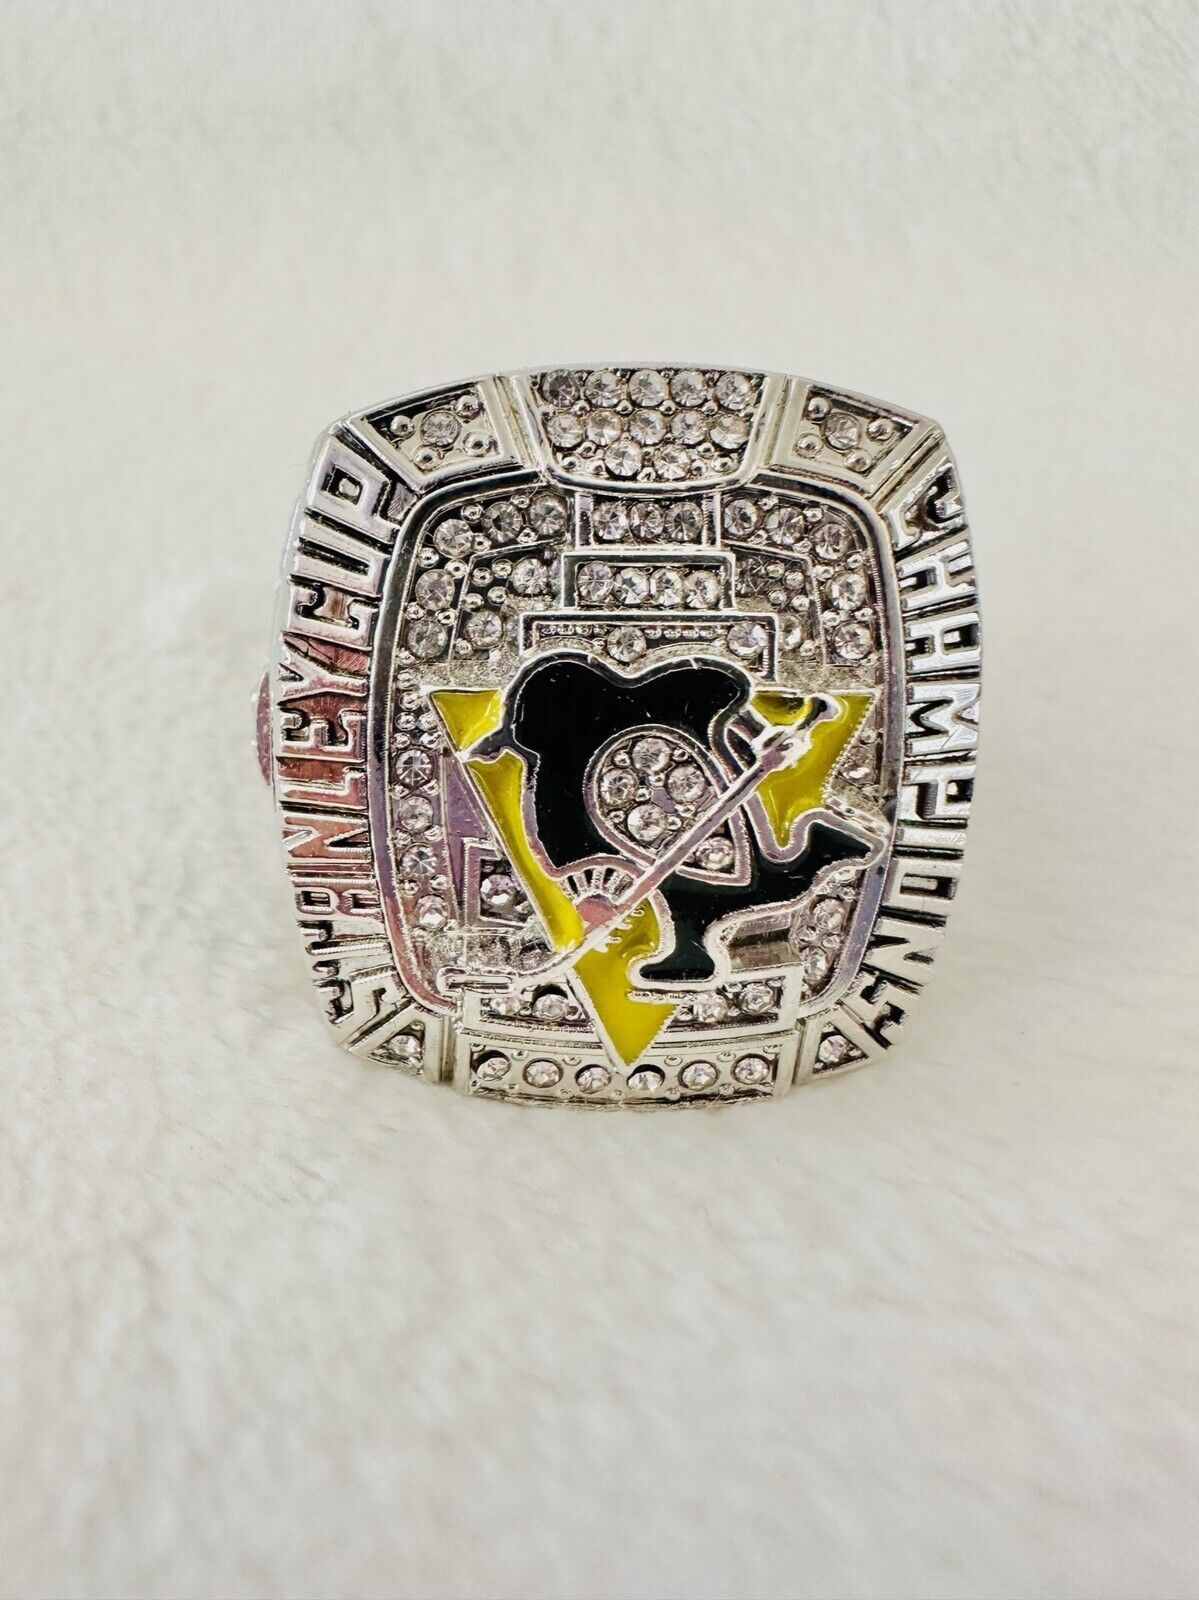 2009 Pittsburgh Penguins  Stanley Cup 18k GP Championship Ring, 🇺🇸 SHIP